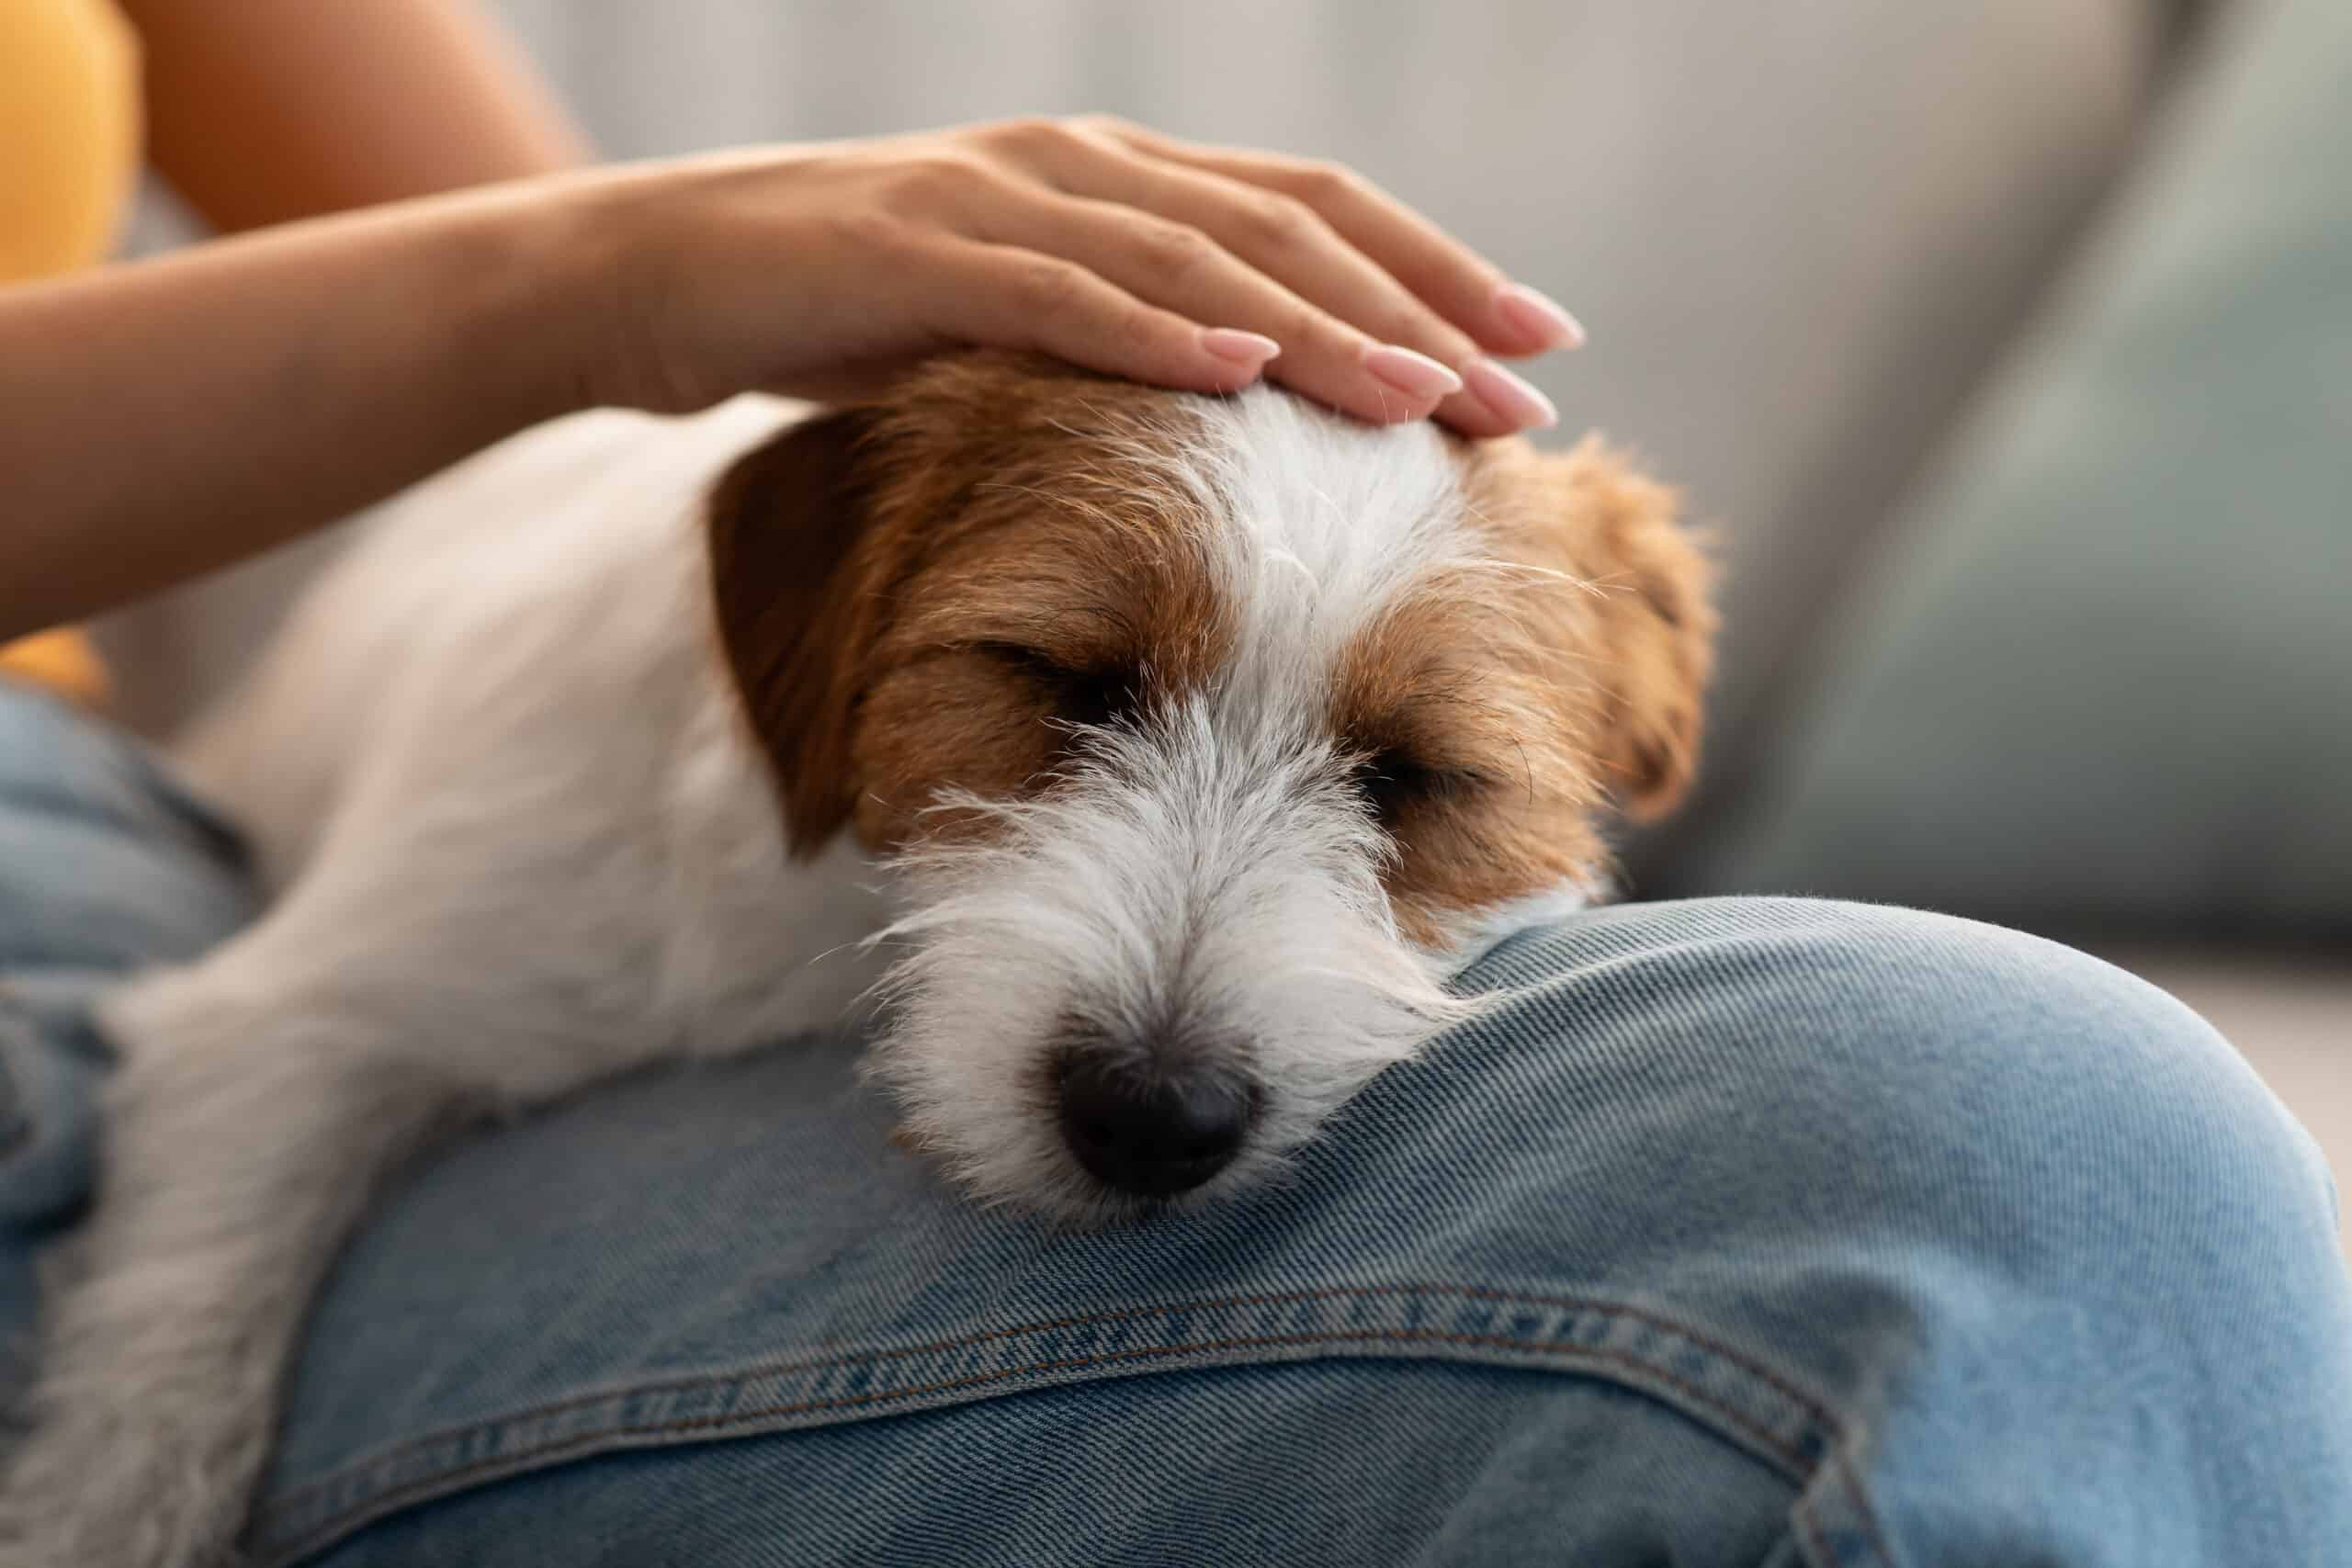 How to Stop Your Puppy From Whining?